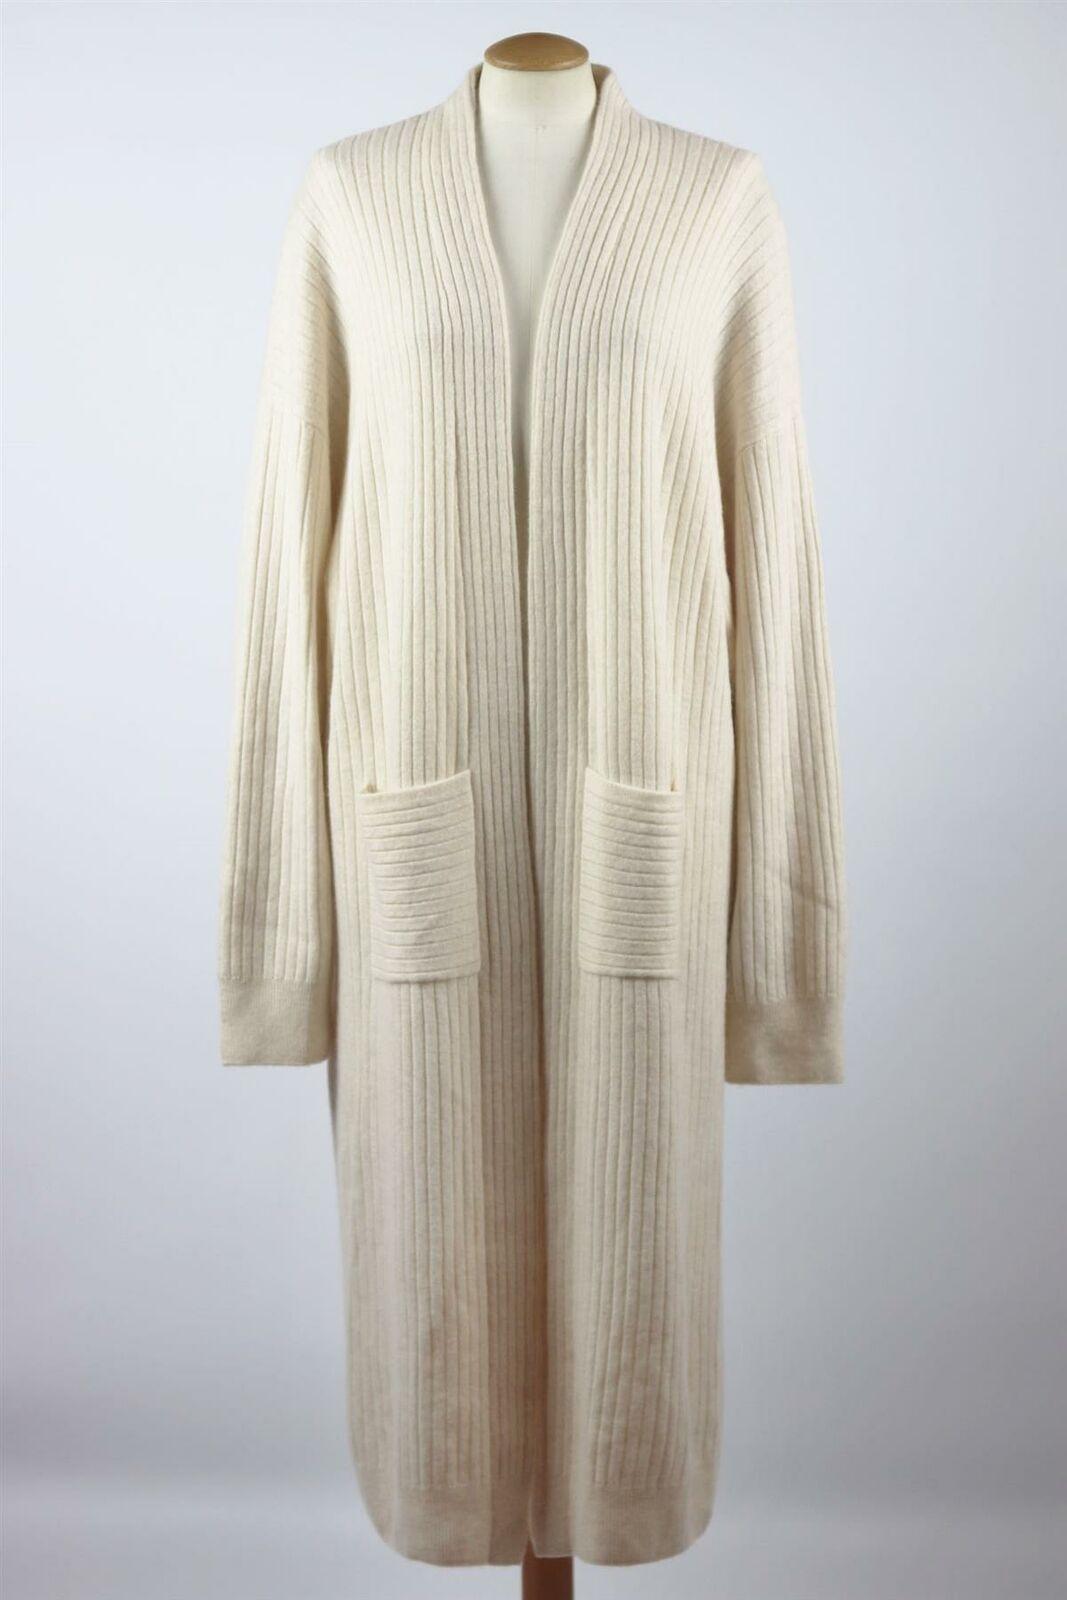 You'll get plenty of wear from this beautiful 'Cade' Sablyn cardigan, long after you days on the ski slopes, it's knitted from soft ribbed cashmere and a long streamline silhouette.
Cream cashmere.
Slips on.
100% Cashmere.

Size: Large (UK 12, US 8,